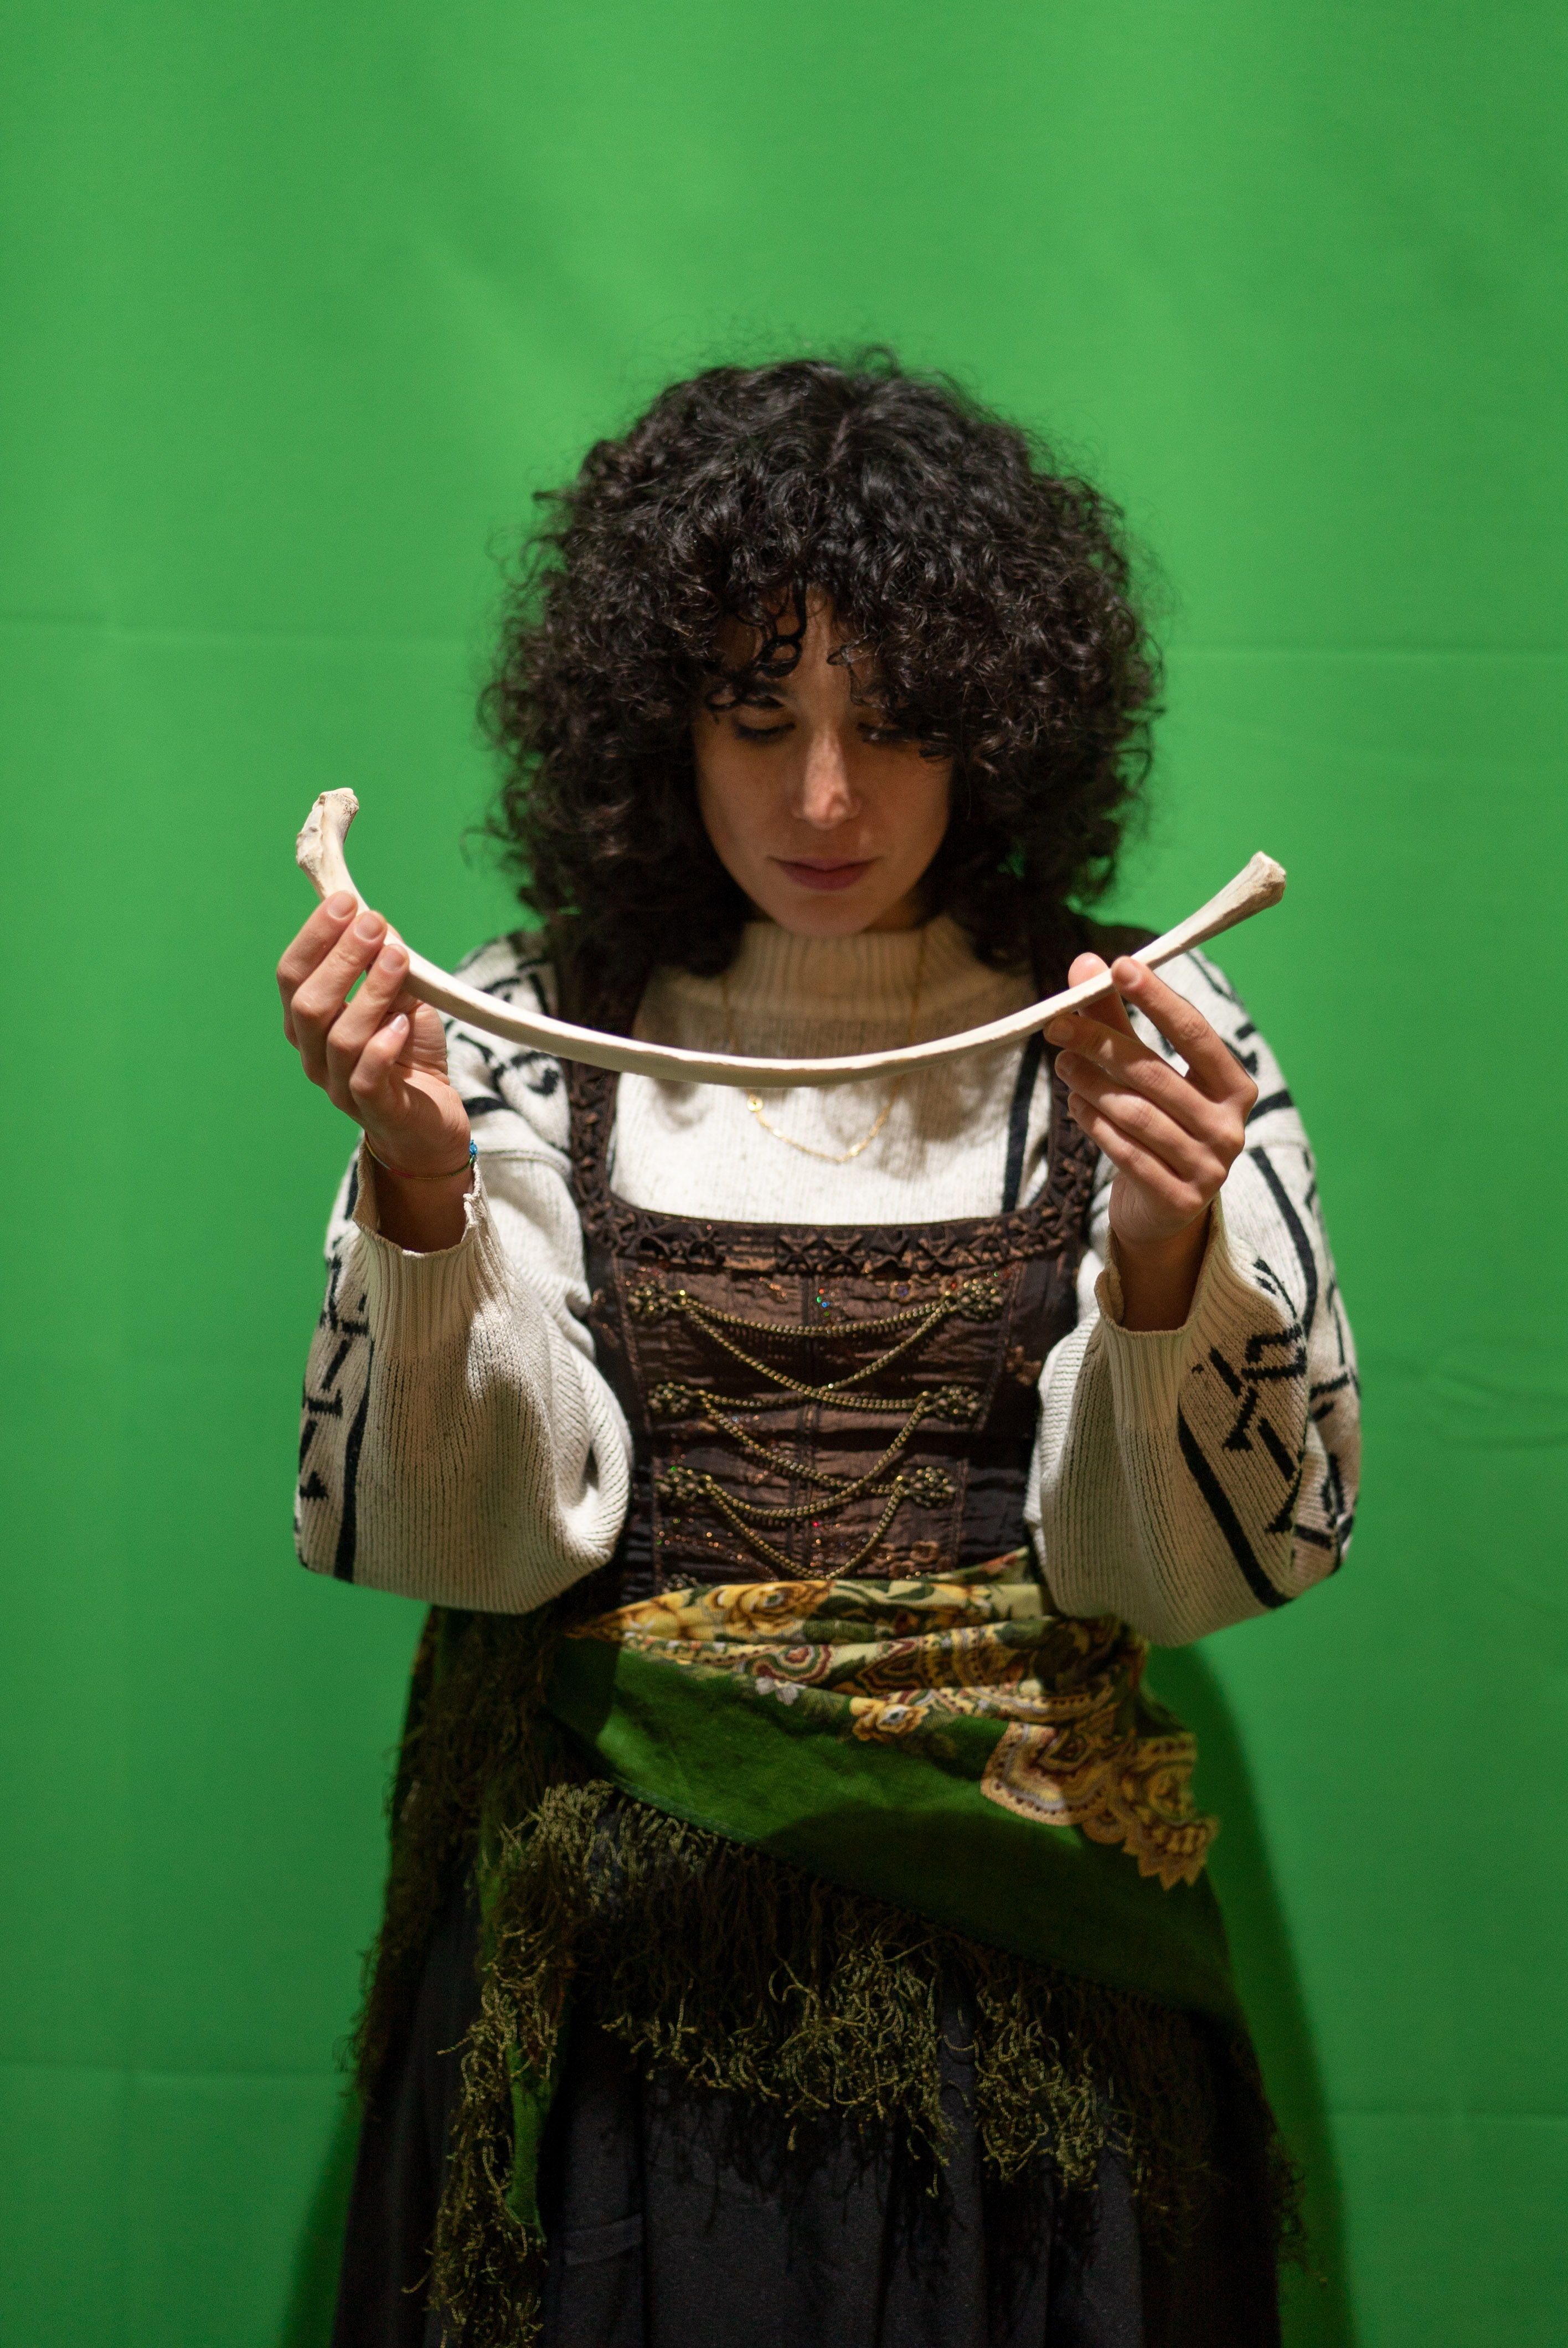 The photo is a medium shot of a person in front of a green screen. They have black curls, wear a wool sweater and over it a traditional costume dress with a scarf around their hips. With their hands they hold a 40cm long bone in front of their face. Their head is lowered and their eyes are directed to the ground.